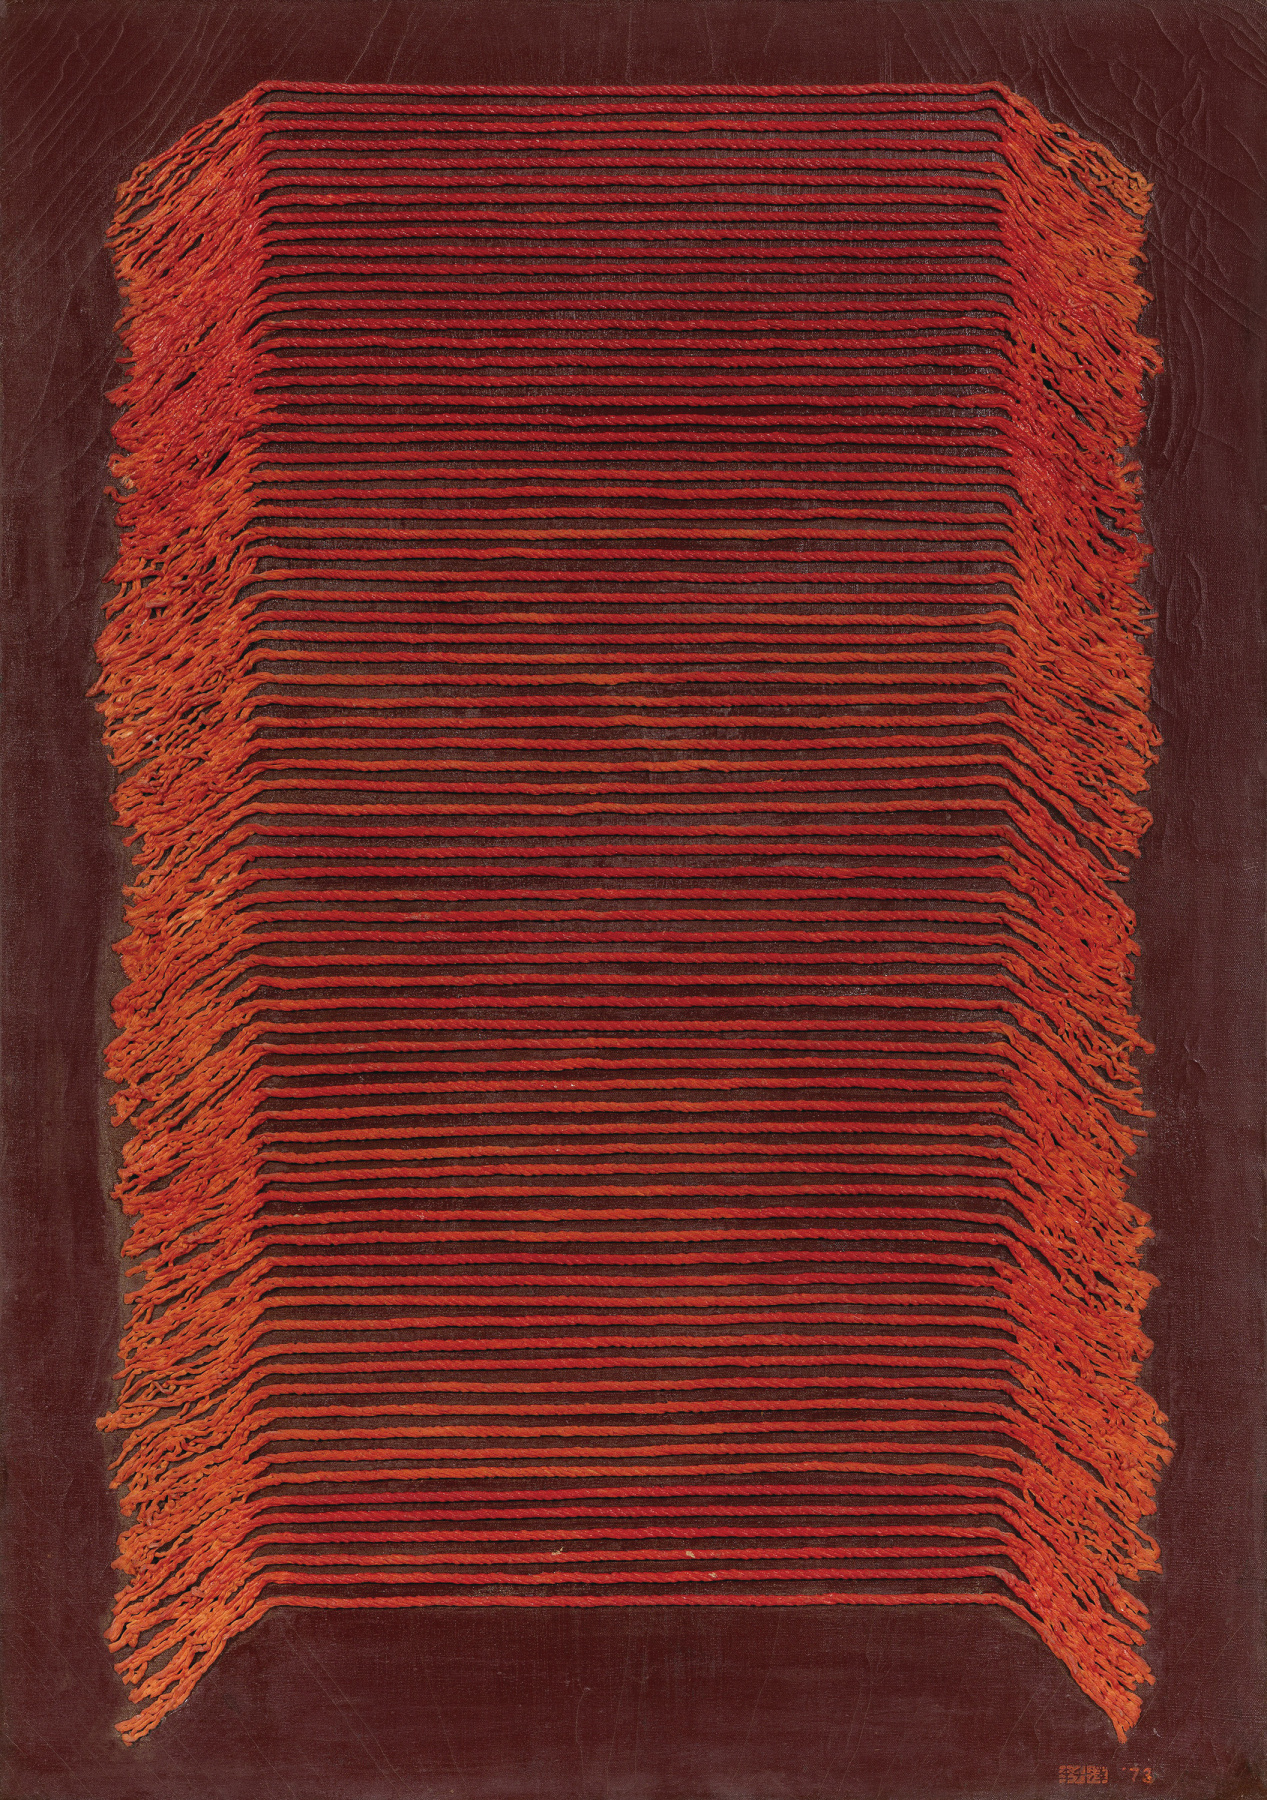 Seung-taek Lee

&amp;ldquo;Untitled&amp;rdquo;, 1972-1973

Rope on colored canvas

45 x 31 3/4 inches

114 x 80.5 cm

LEE 10